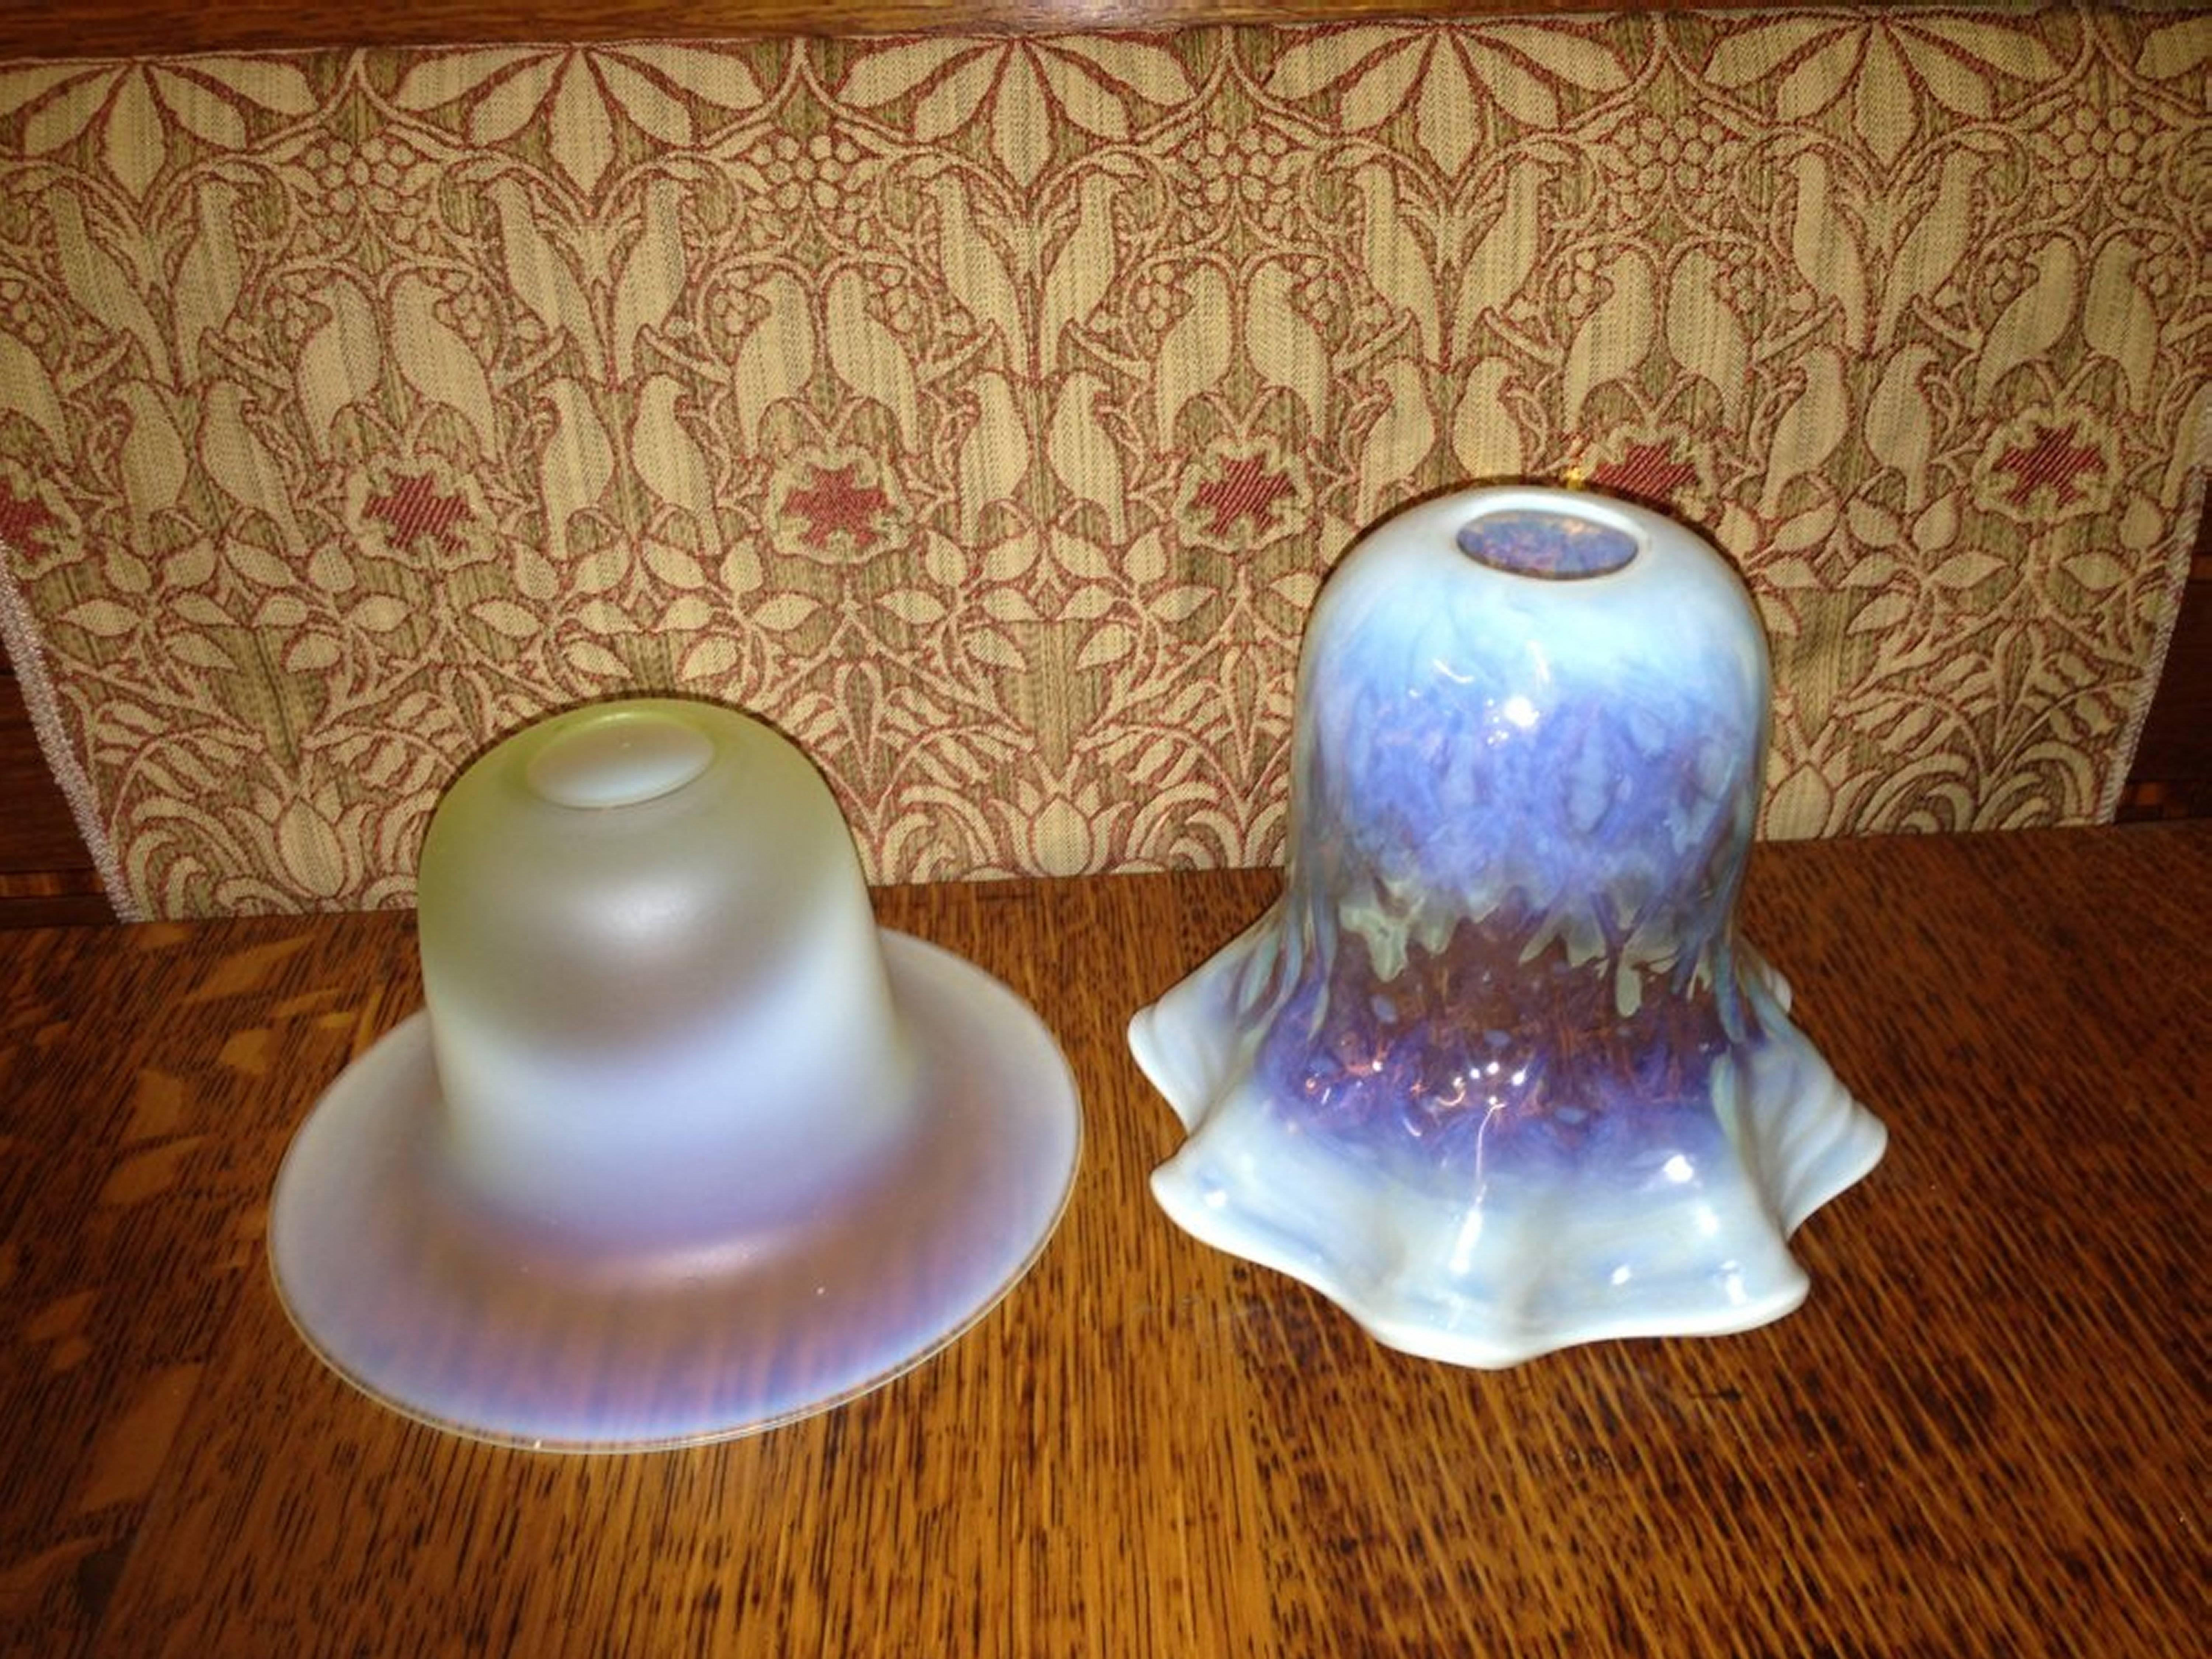 A flat rim Arts and Crafts Vaseline/Uranium Glass Shade and one with a frilly rim.
Left flat rim measures: Height 3 1/4